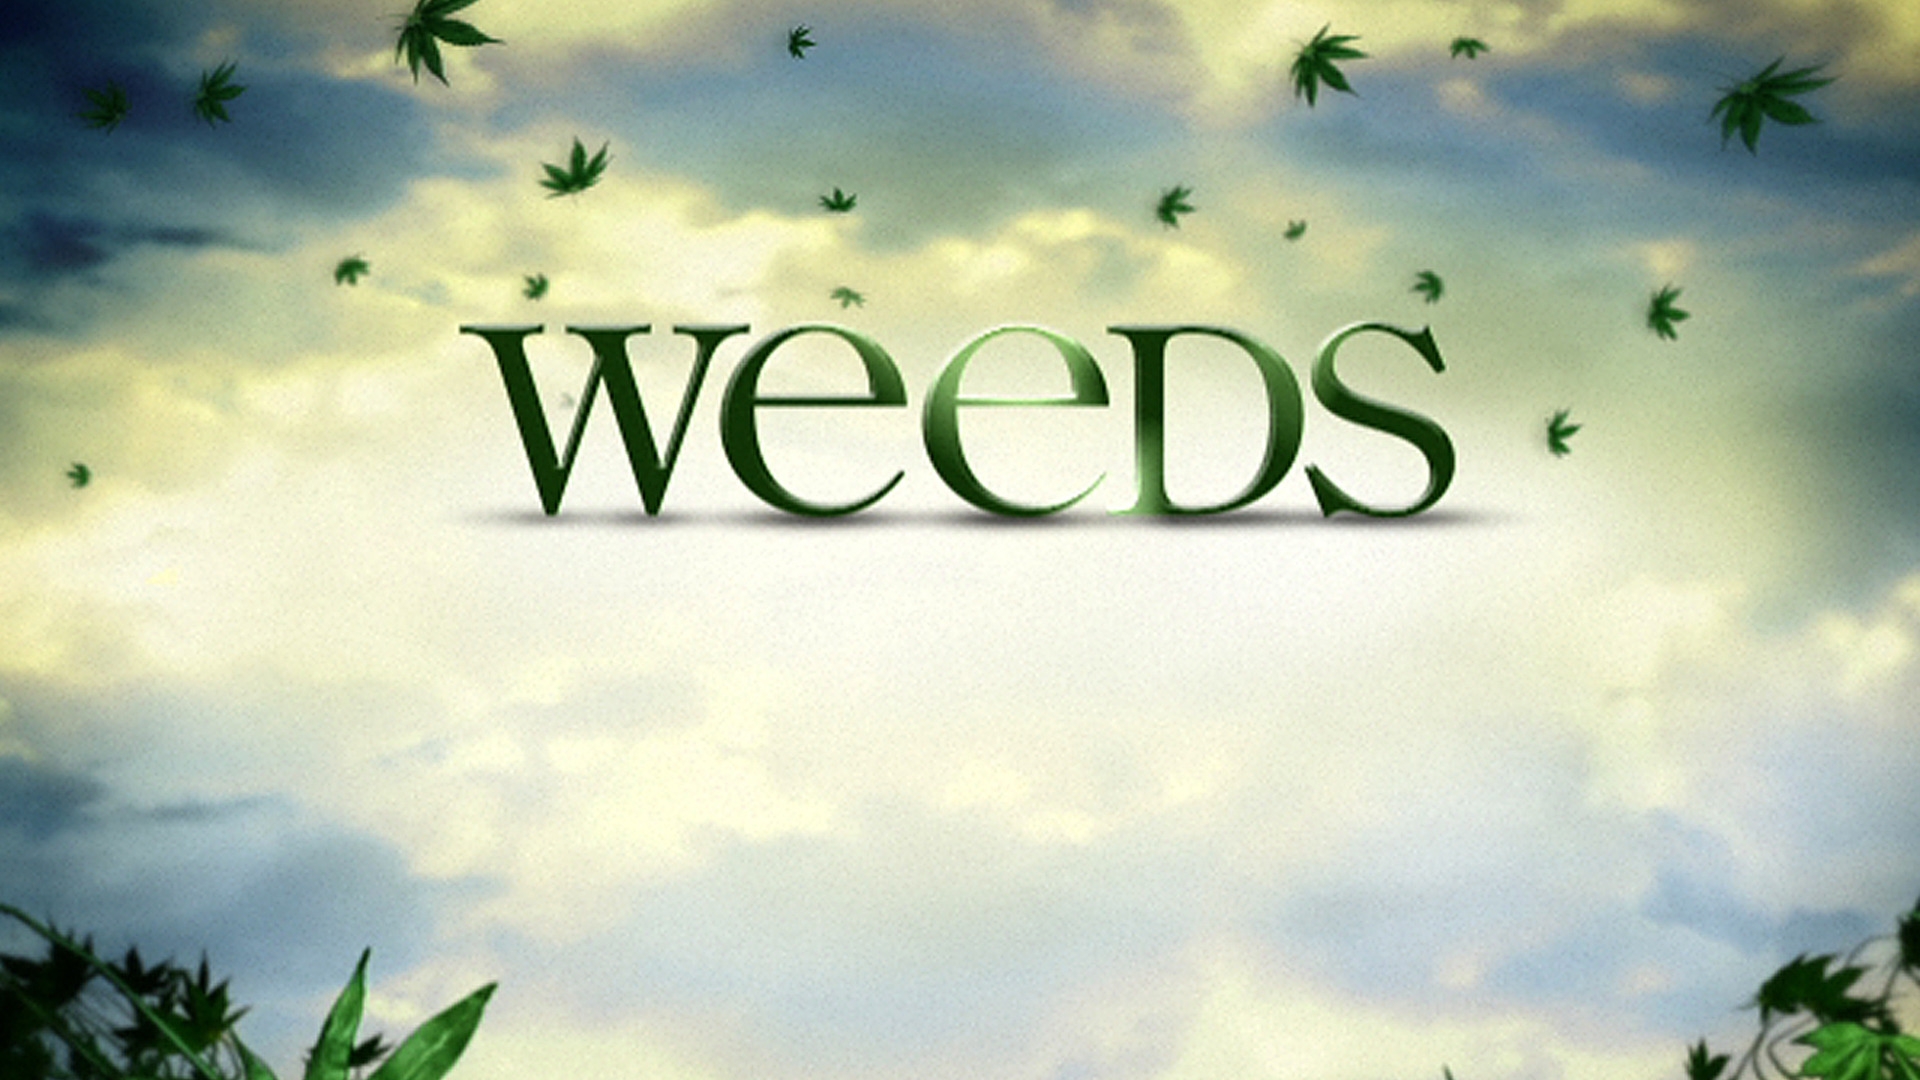 Weeds Logo for 1920 x 1080 HDTV 1080p resolution